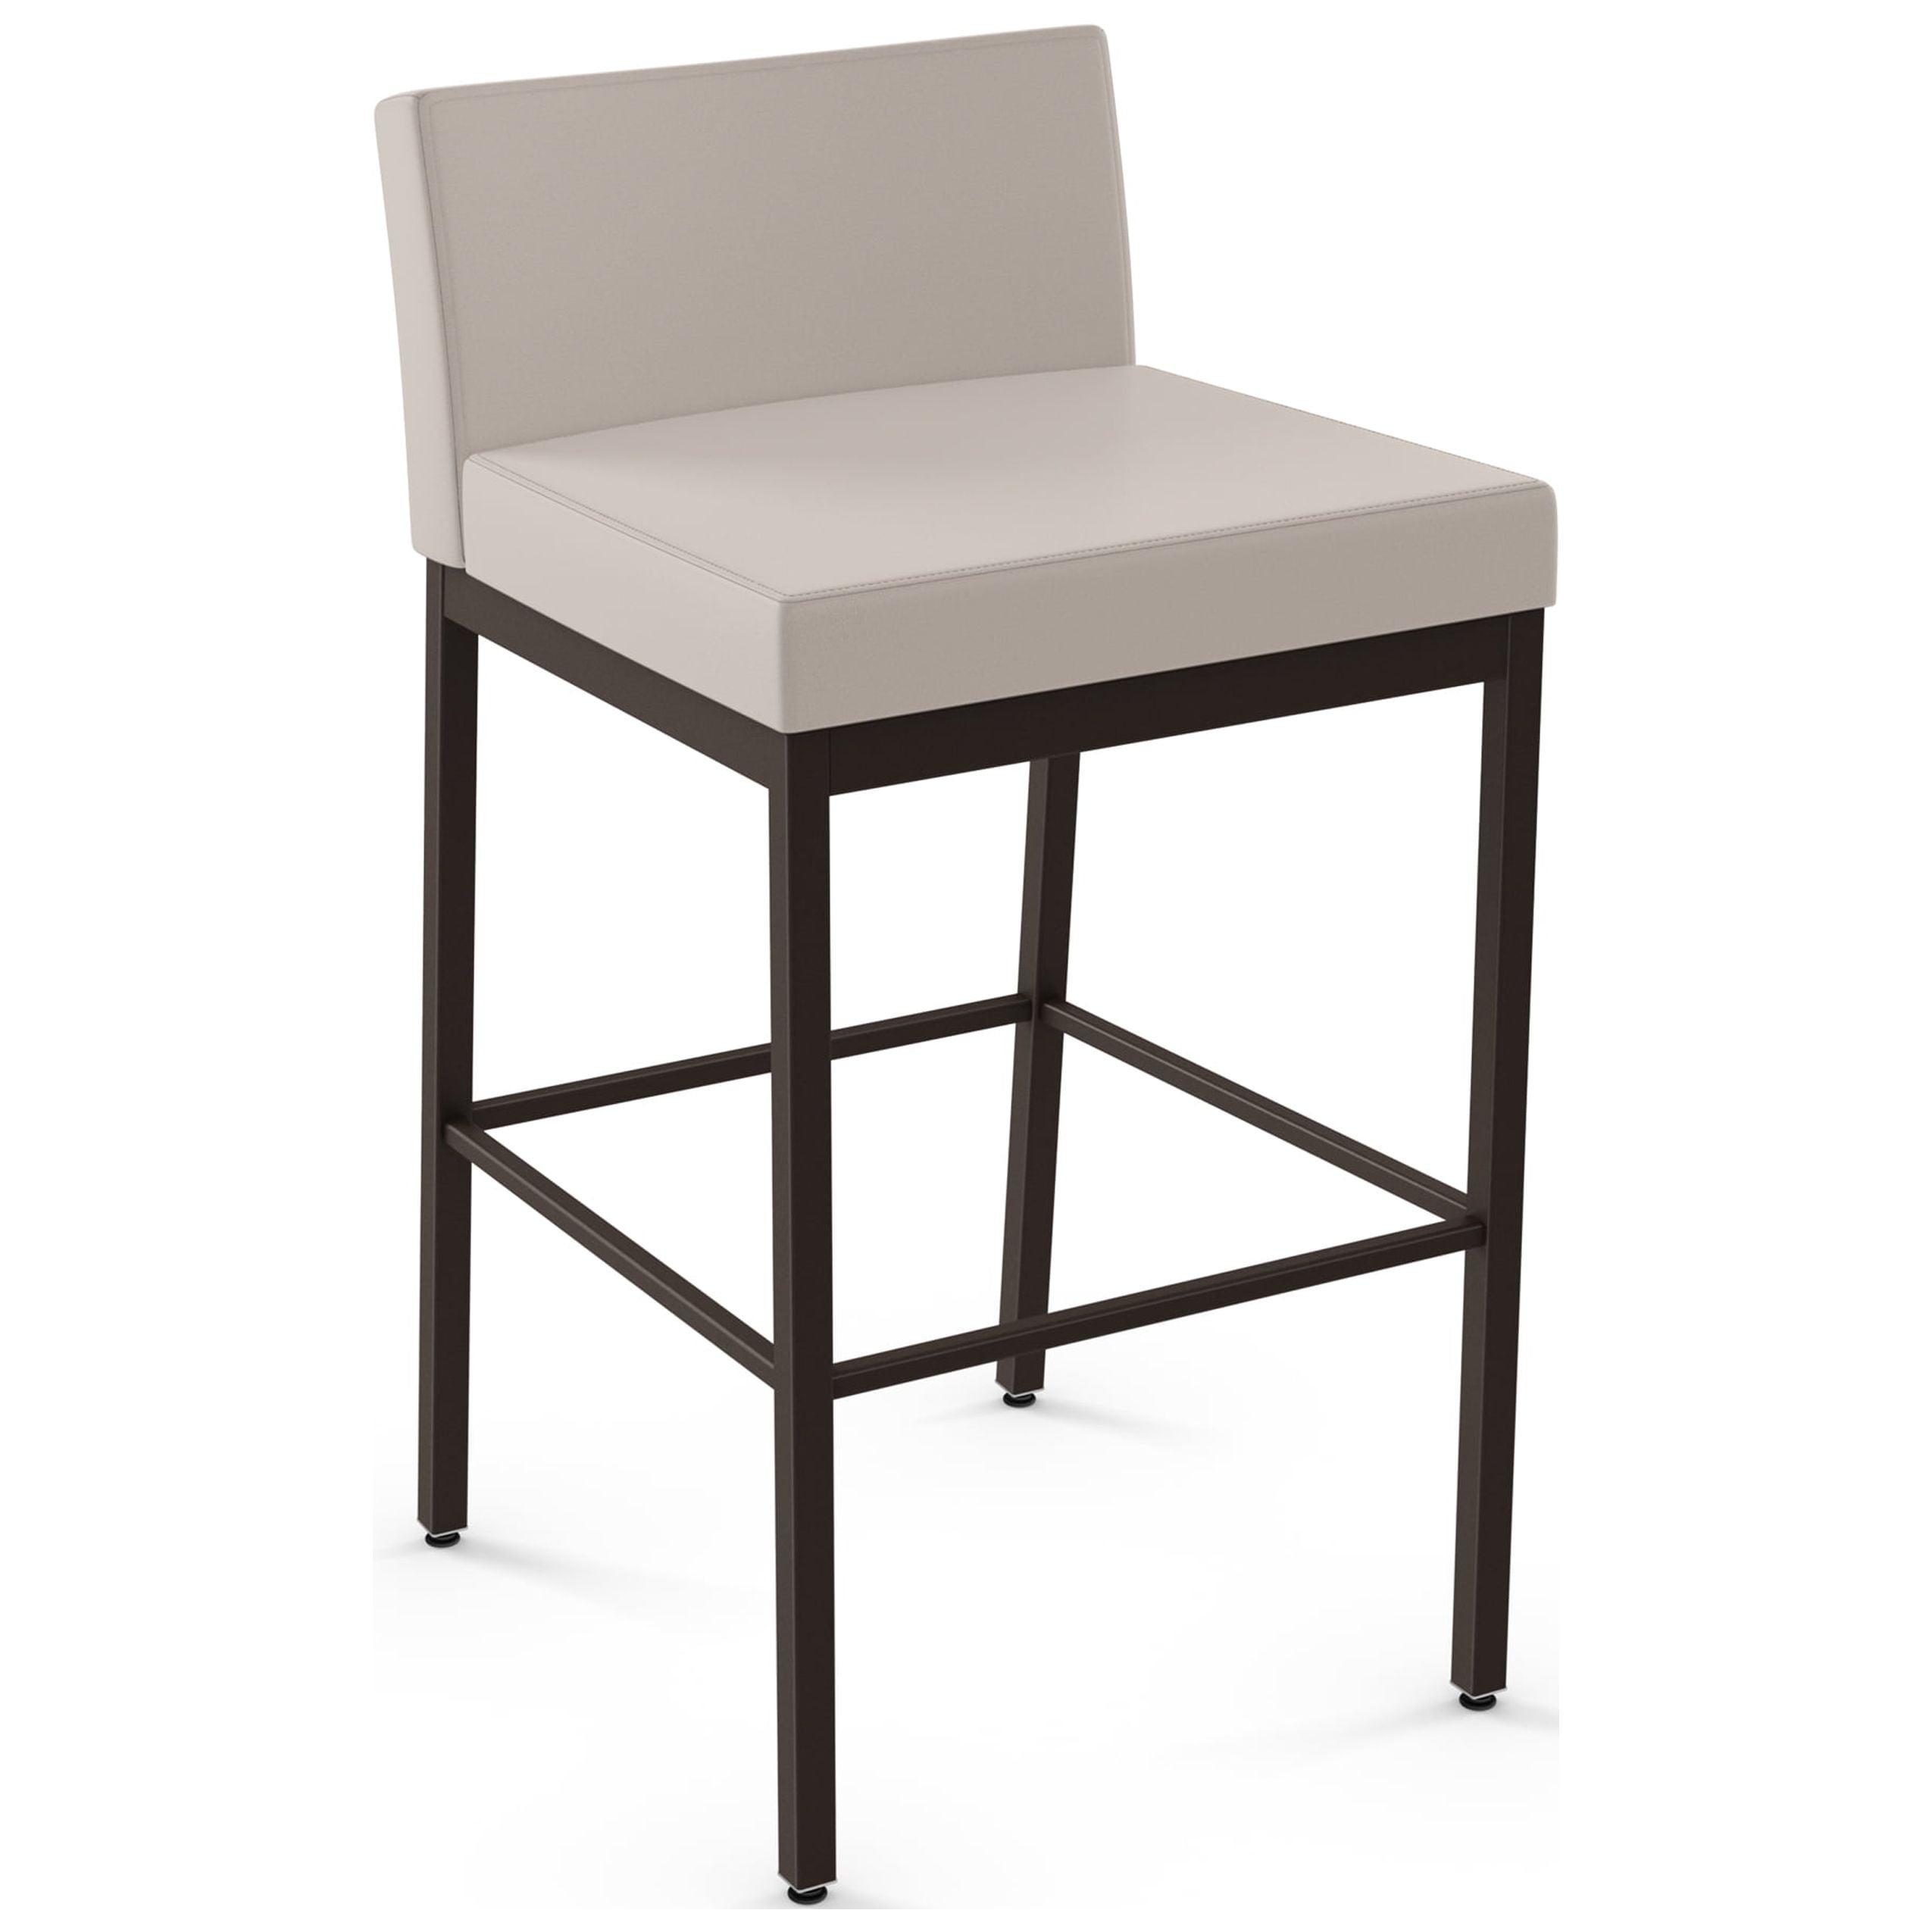 Modern Fairfield 30" Bar Stool in Cream Faux Leather and Dark Brown Metal